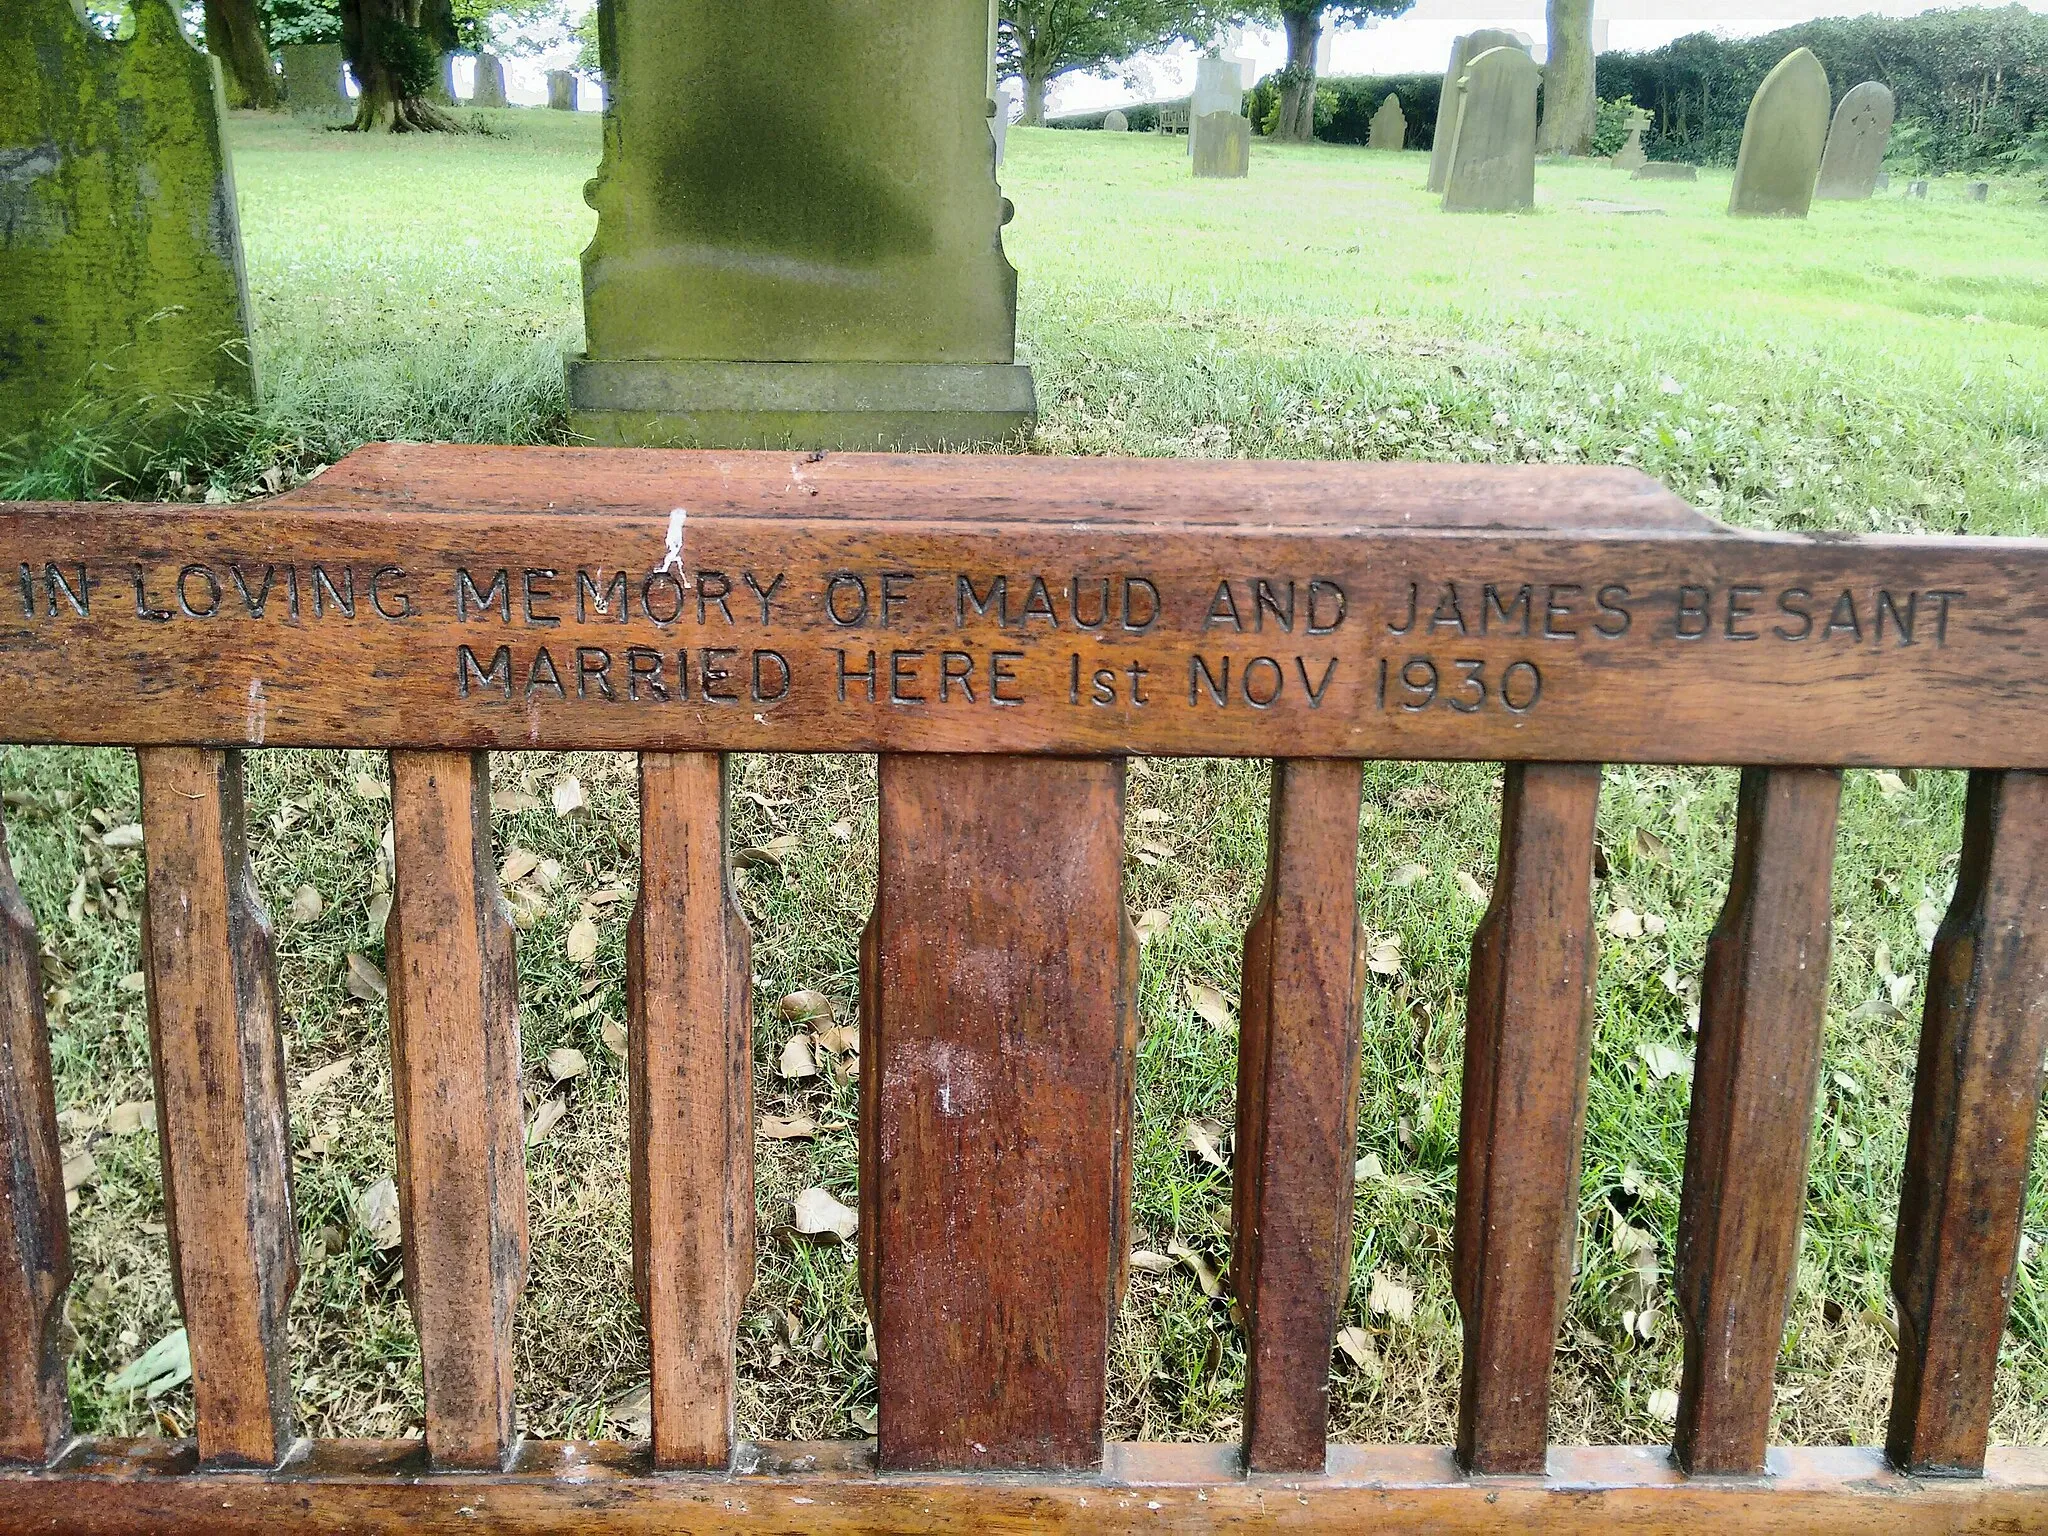 Photo showing: IN LOVING MEMORY OF MAUD AND JAMES BESANT
MARRIED HERE Ist NOV 1930